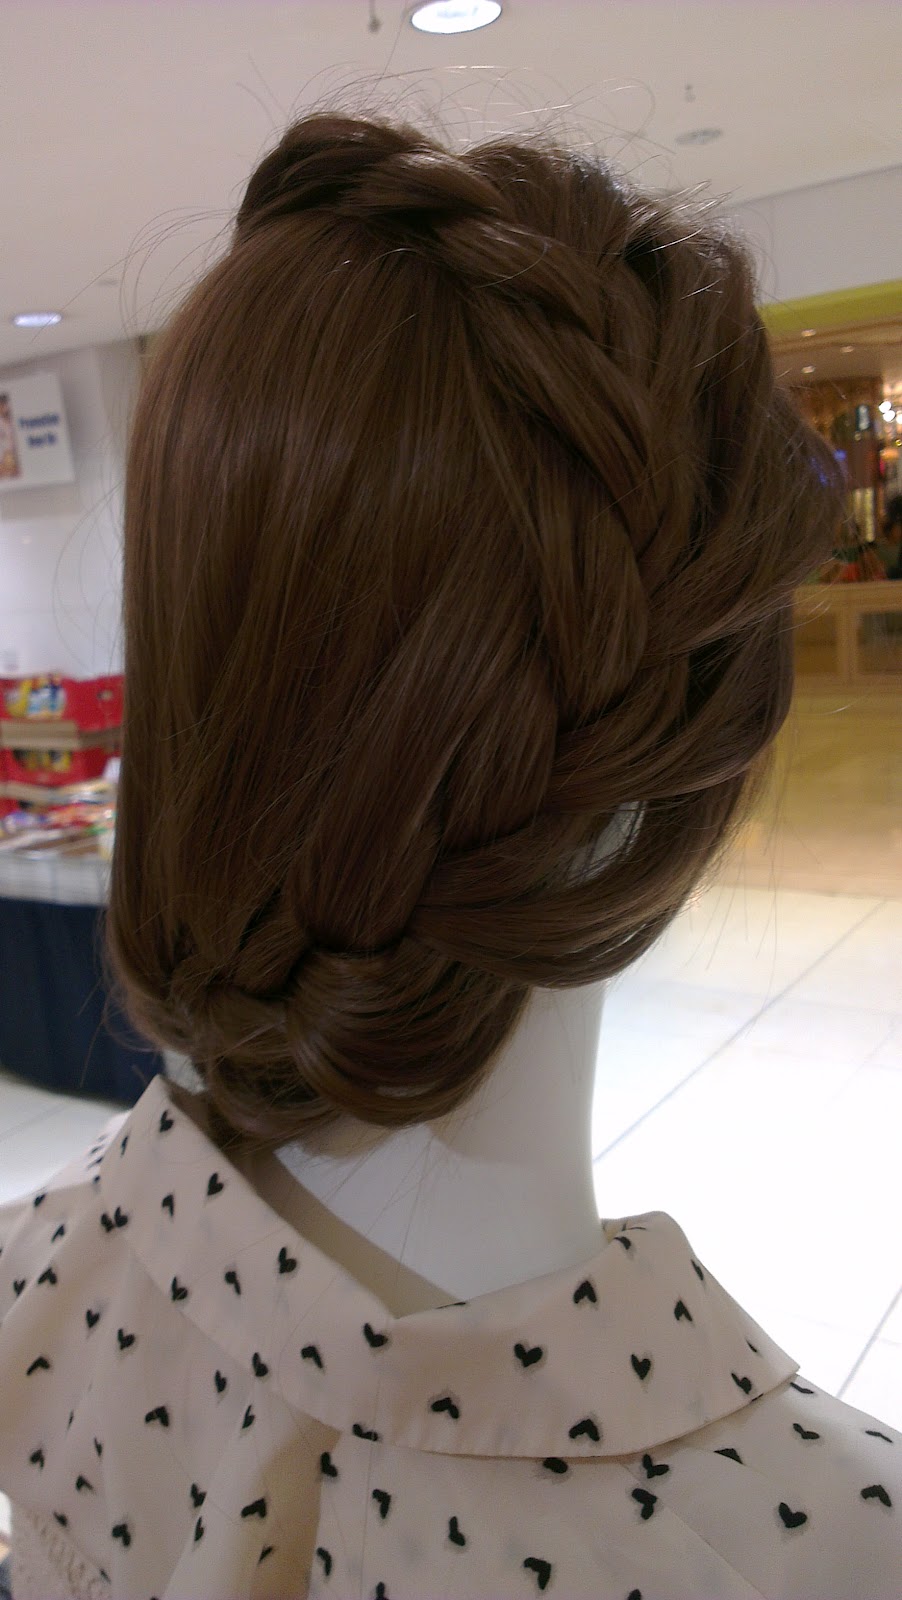 Dip Drops Singapore: French Braid Hairstyle Ideas